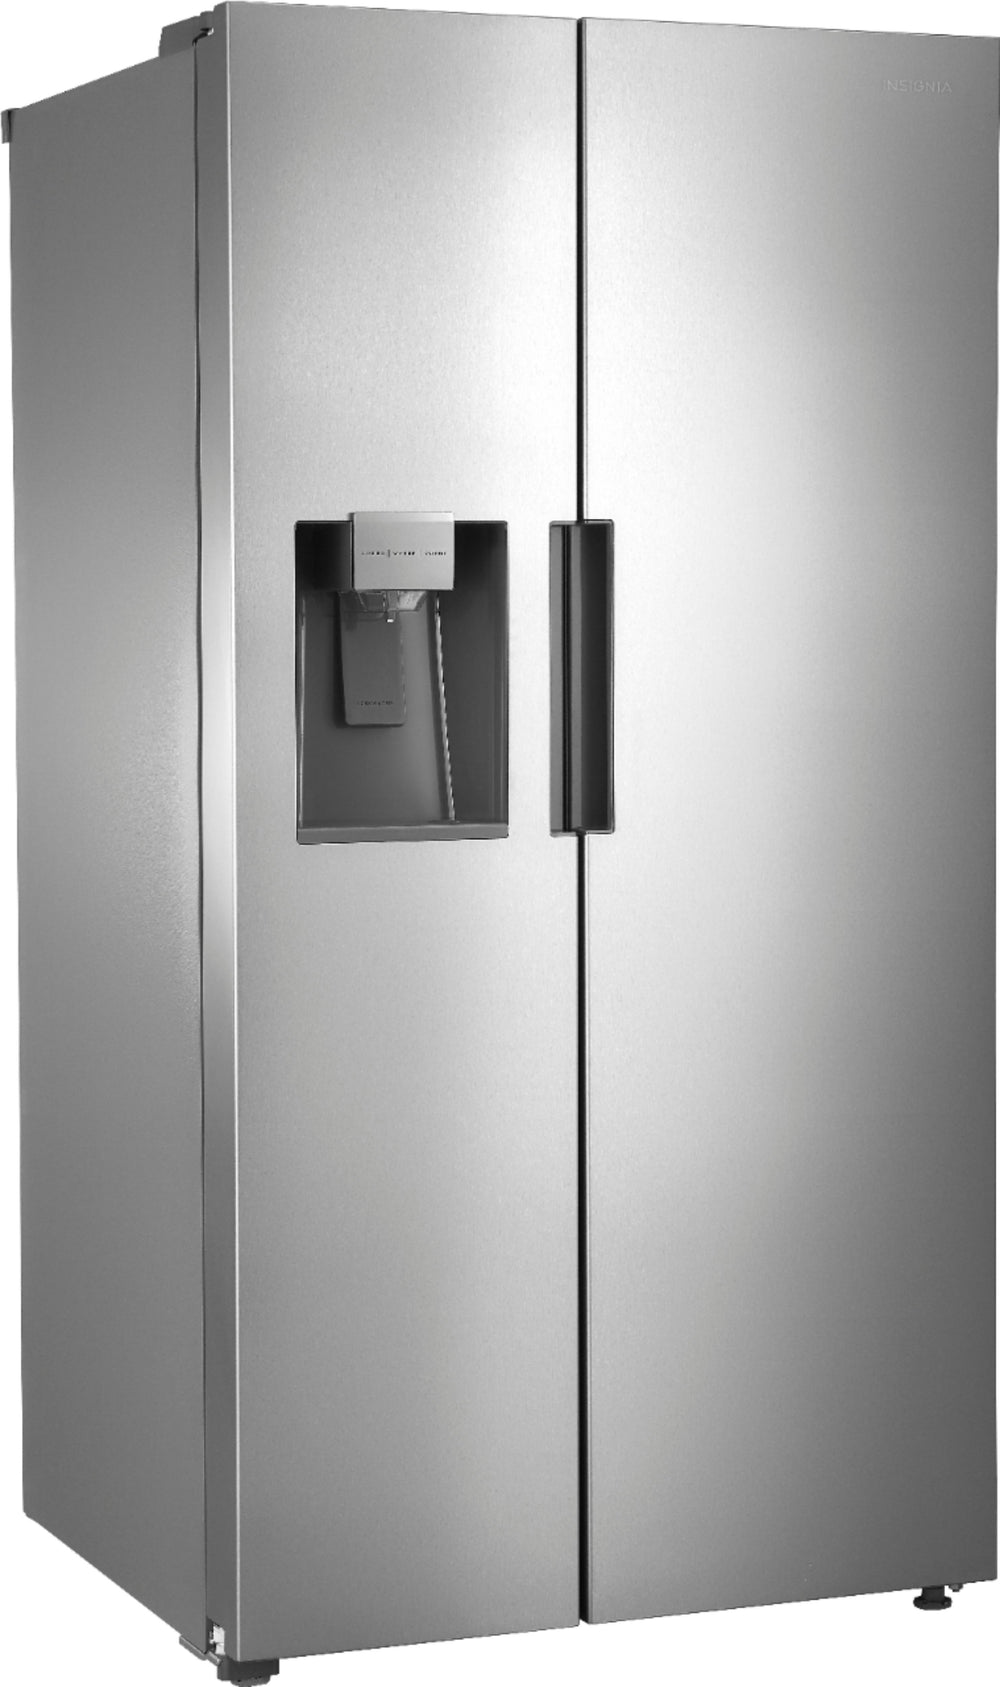 Insignia™ - 26 5/16 Cu. Ft. Side-by-Side Refrigerator - Stainless steel_1